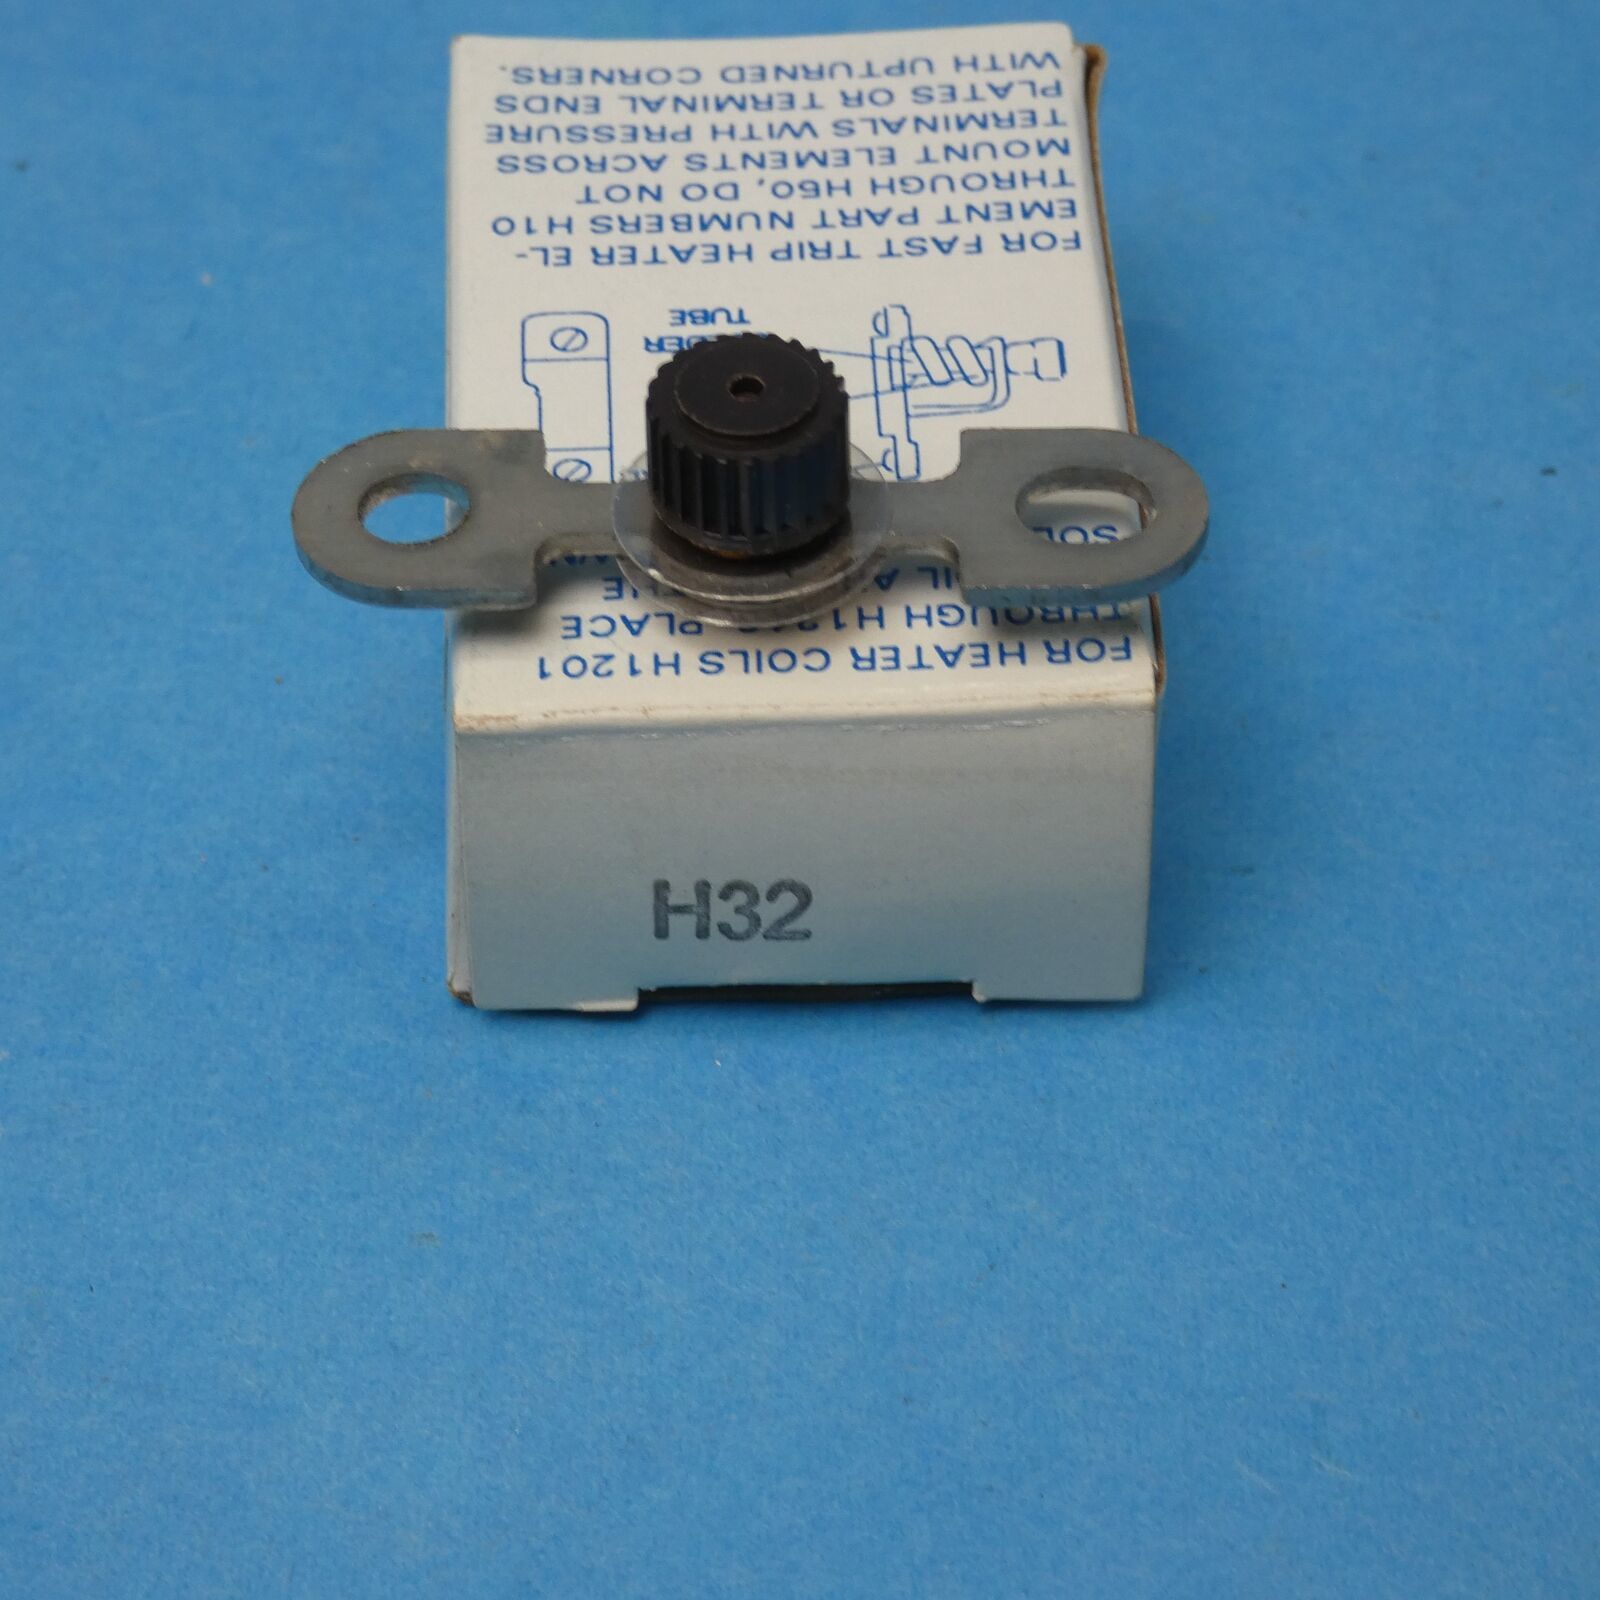 Eaton Cutler Hammer Westinghouse H32 Fast Trip Thermal Overload Relay Heater New - $7.49